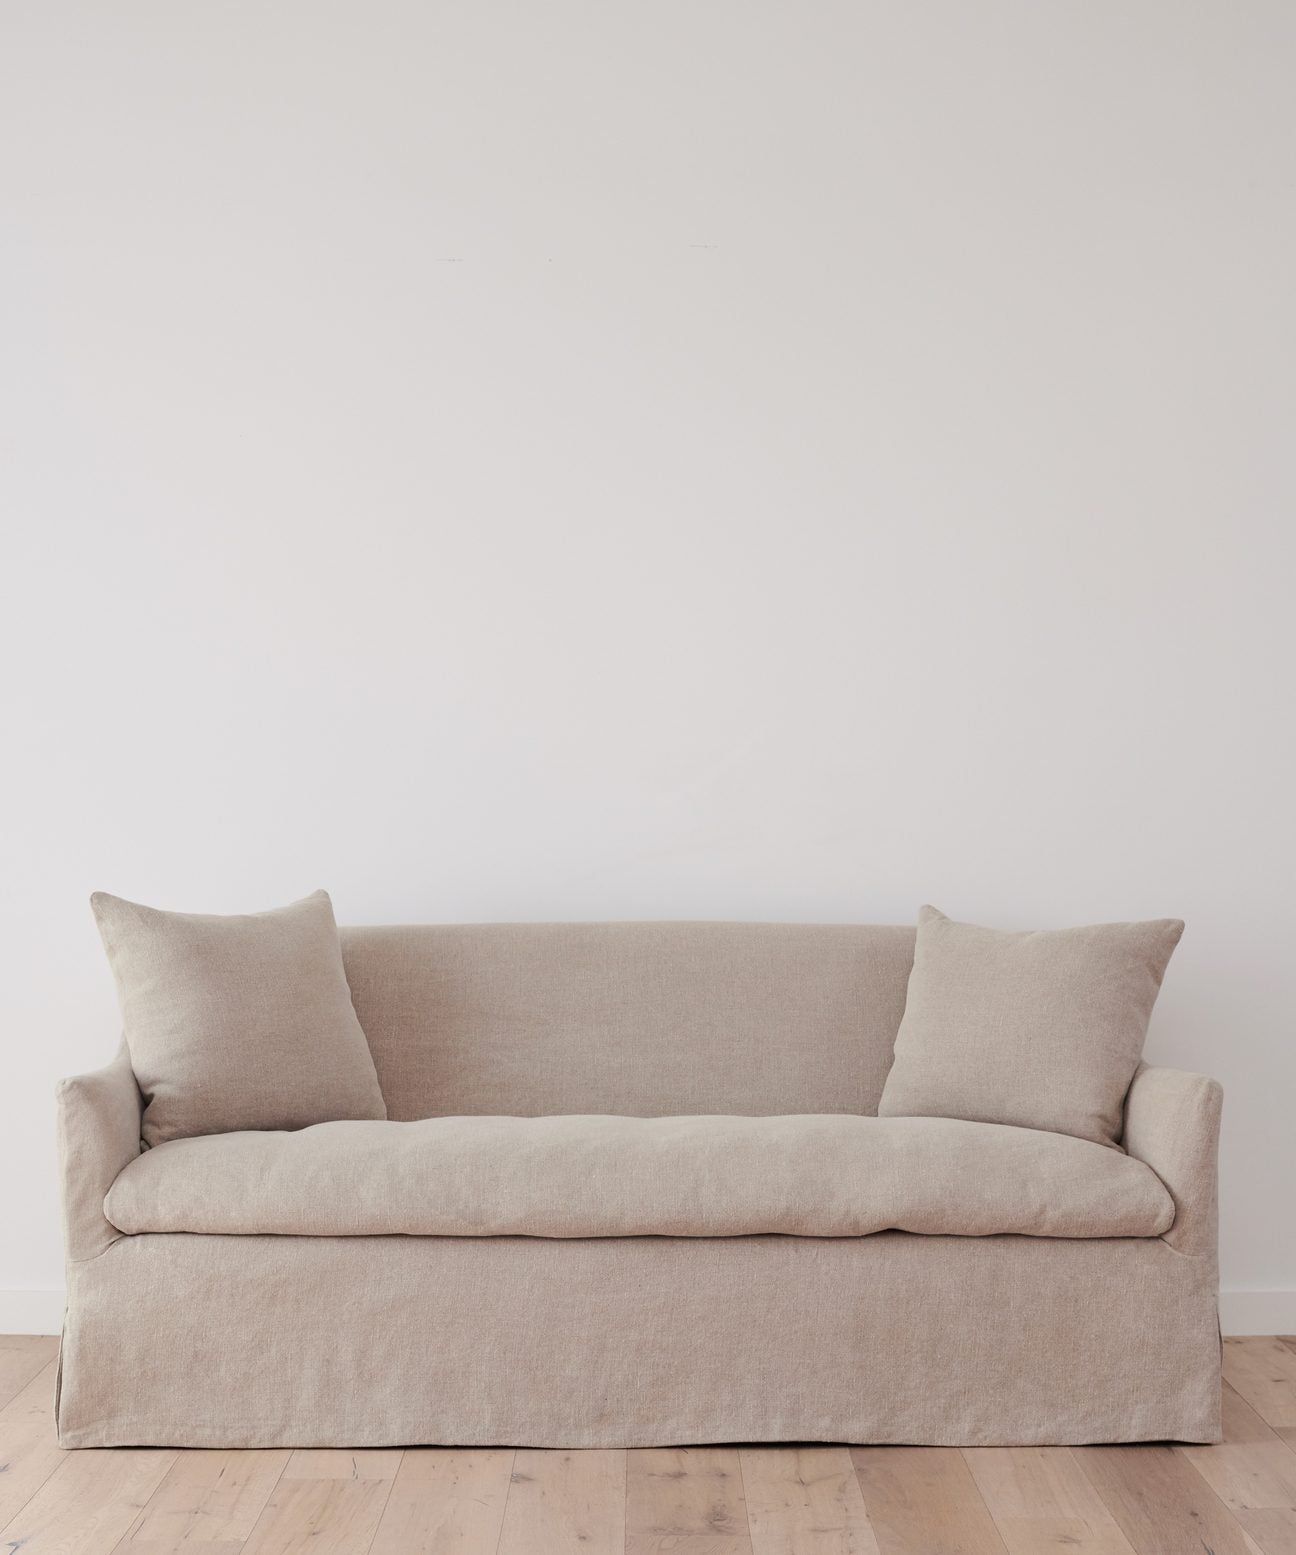 SLIPCOVER SOFA : CLOTHING FOR THE
  FURNITURE